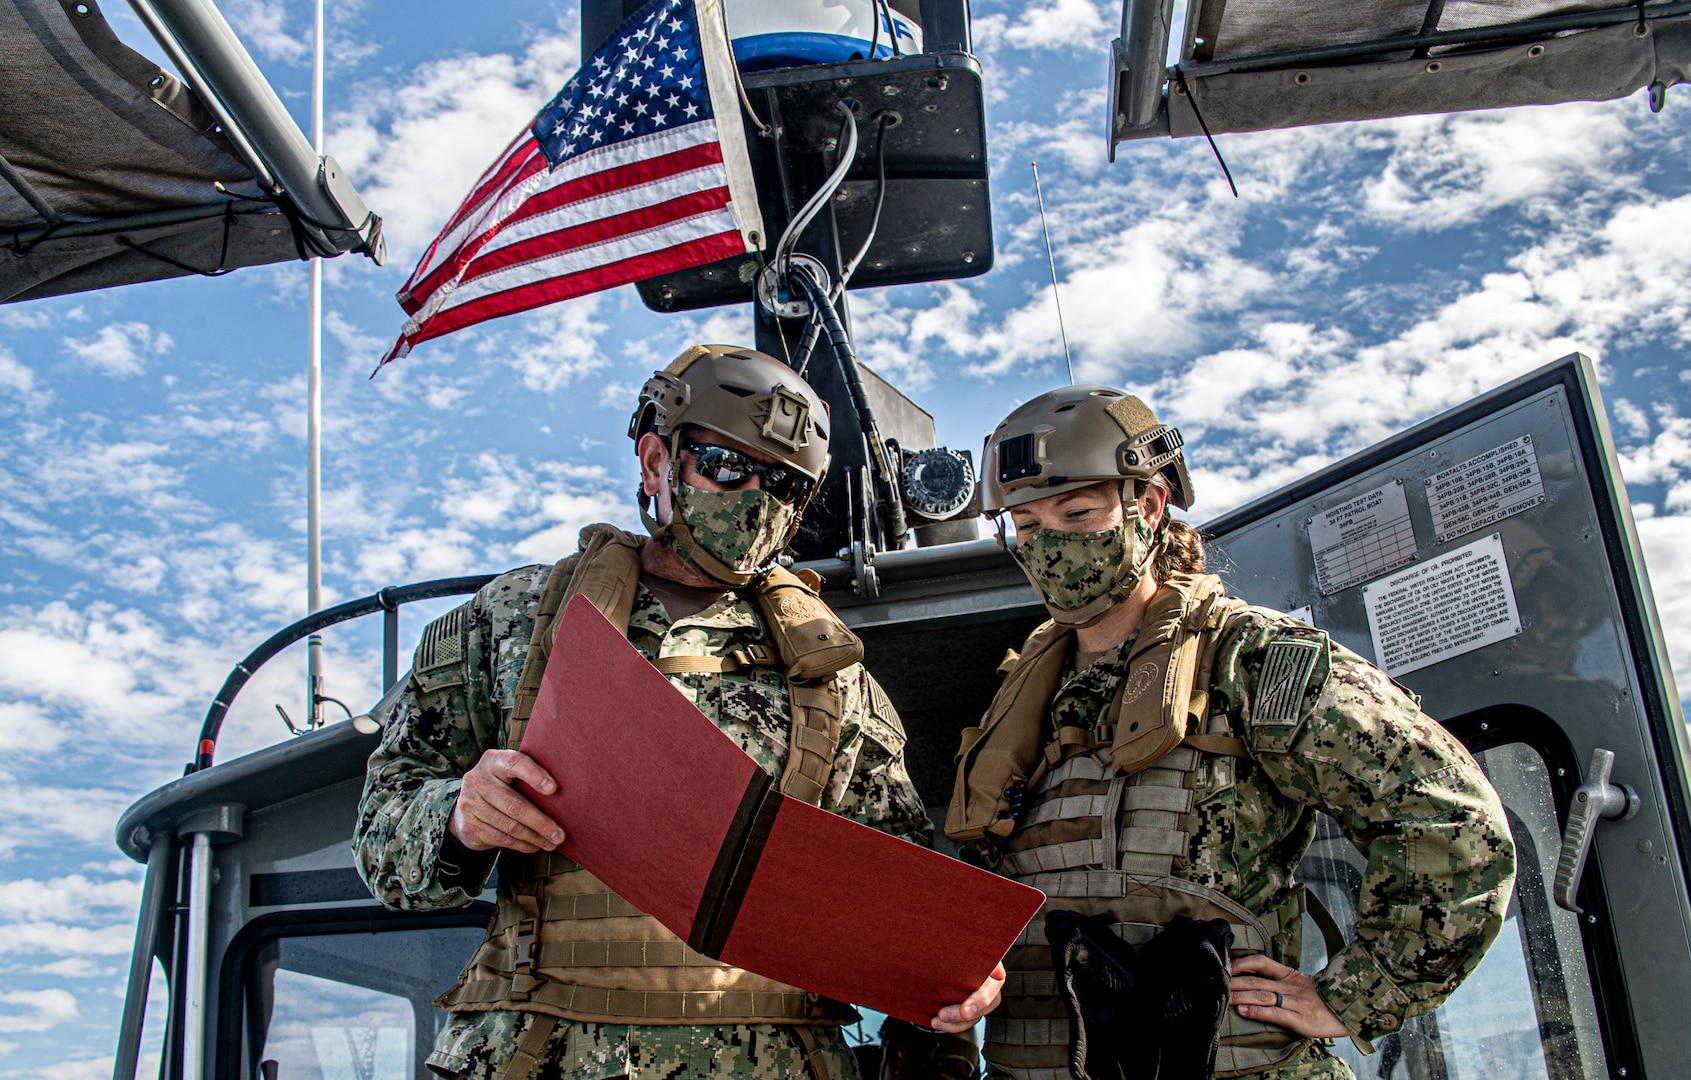 Training officer, on left, assigned to Maritime Expeditionary Security Squadron 11, briefs squadron’s chief staff officer and executive officer aboard 34-foot Sea Ark patrol boat during navigation check ride exercise off coast of Long Beach, California, November 12, 2020 (U.S. Navy/Nelson Doromal, Jr.)